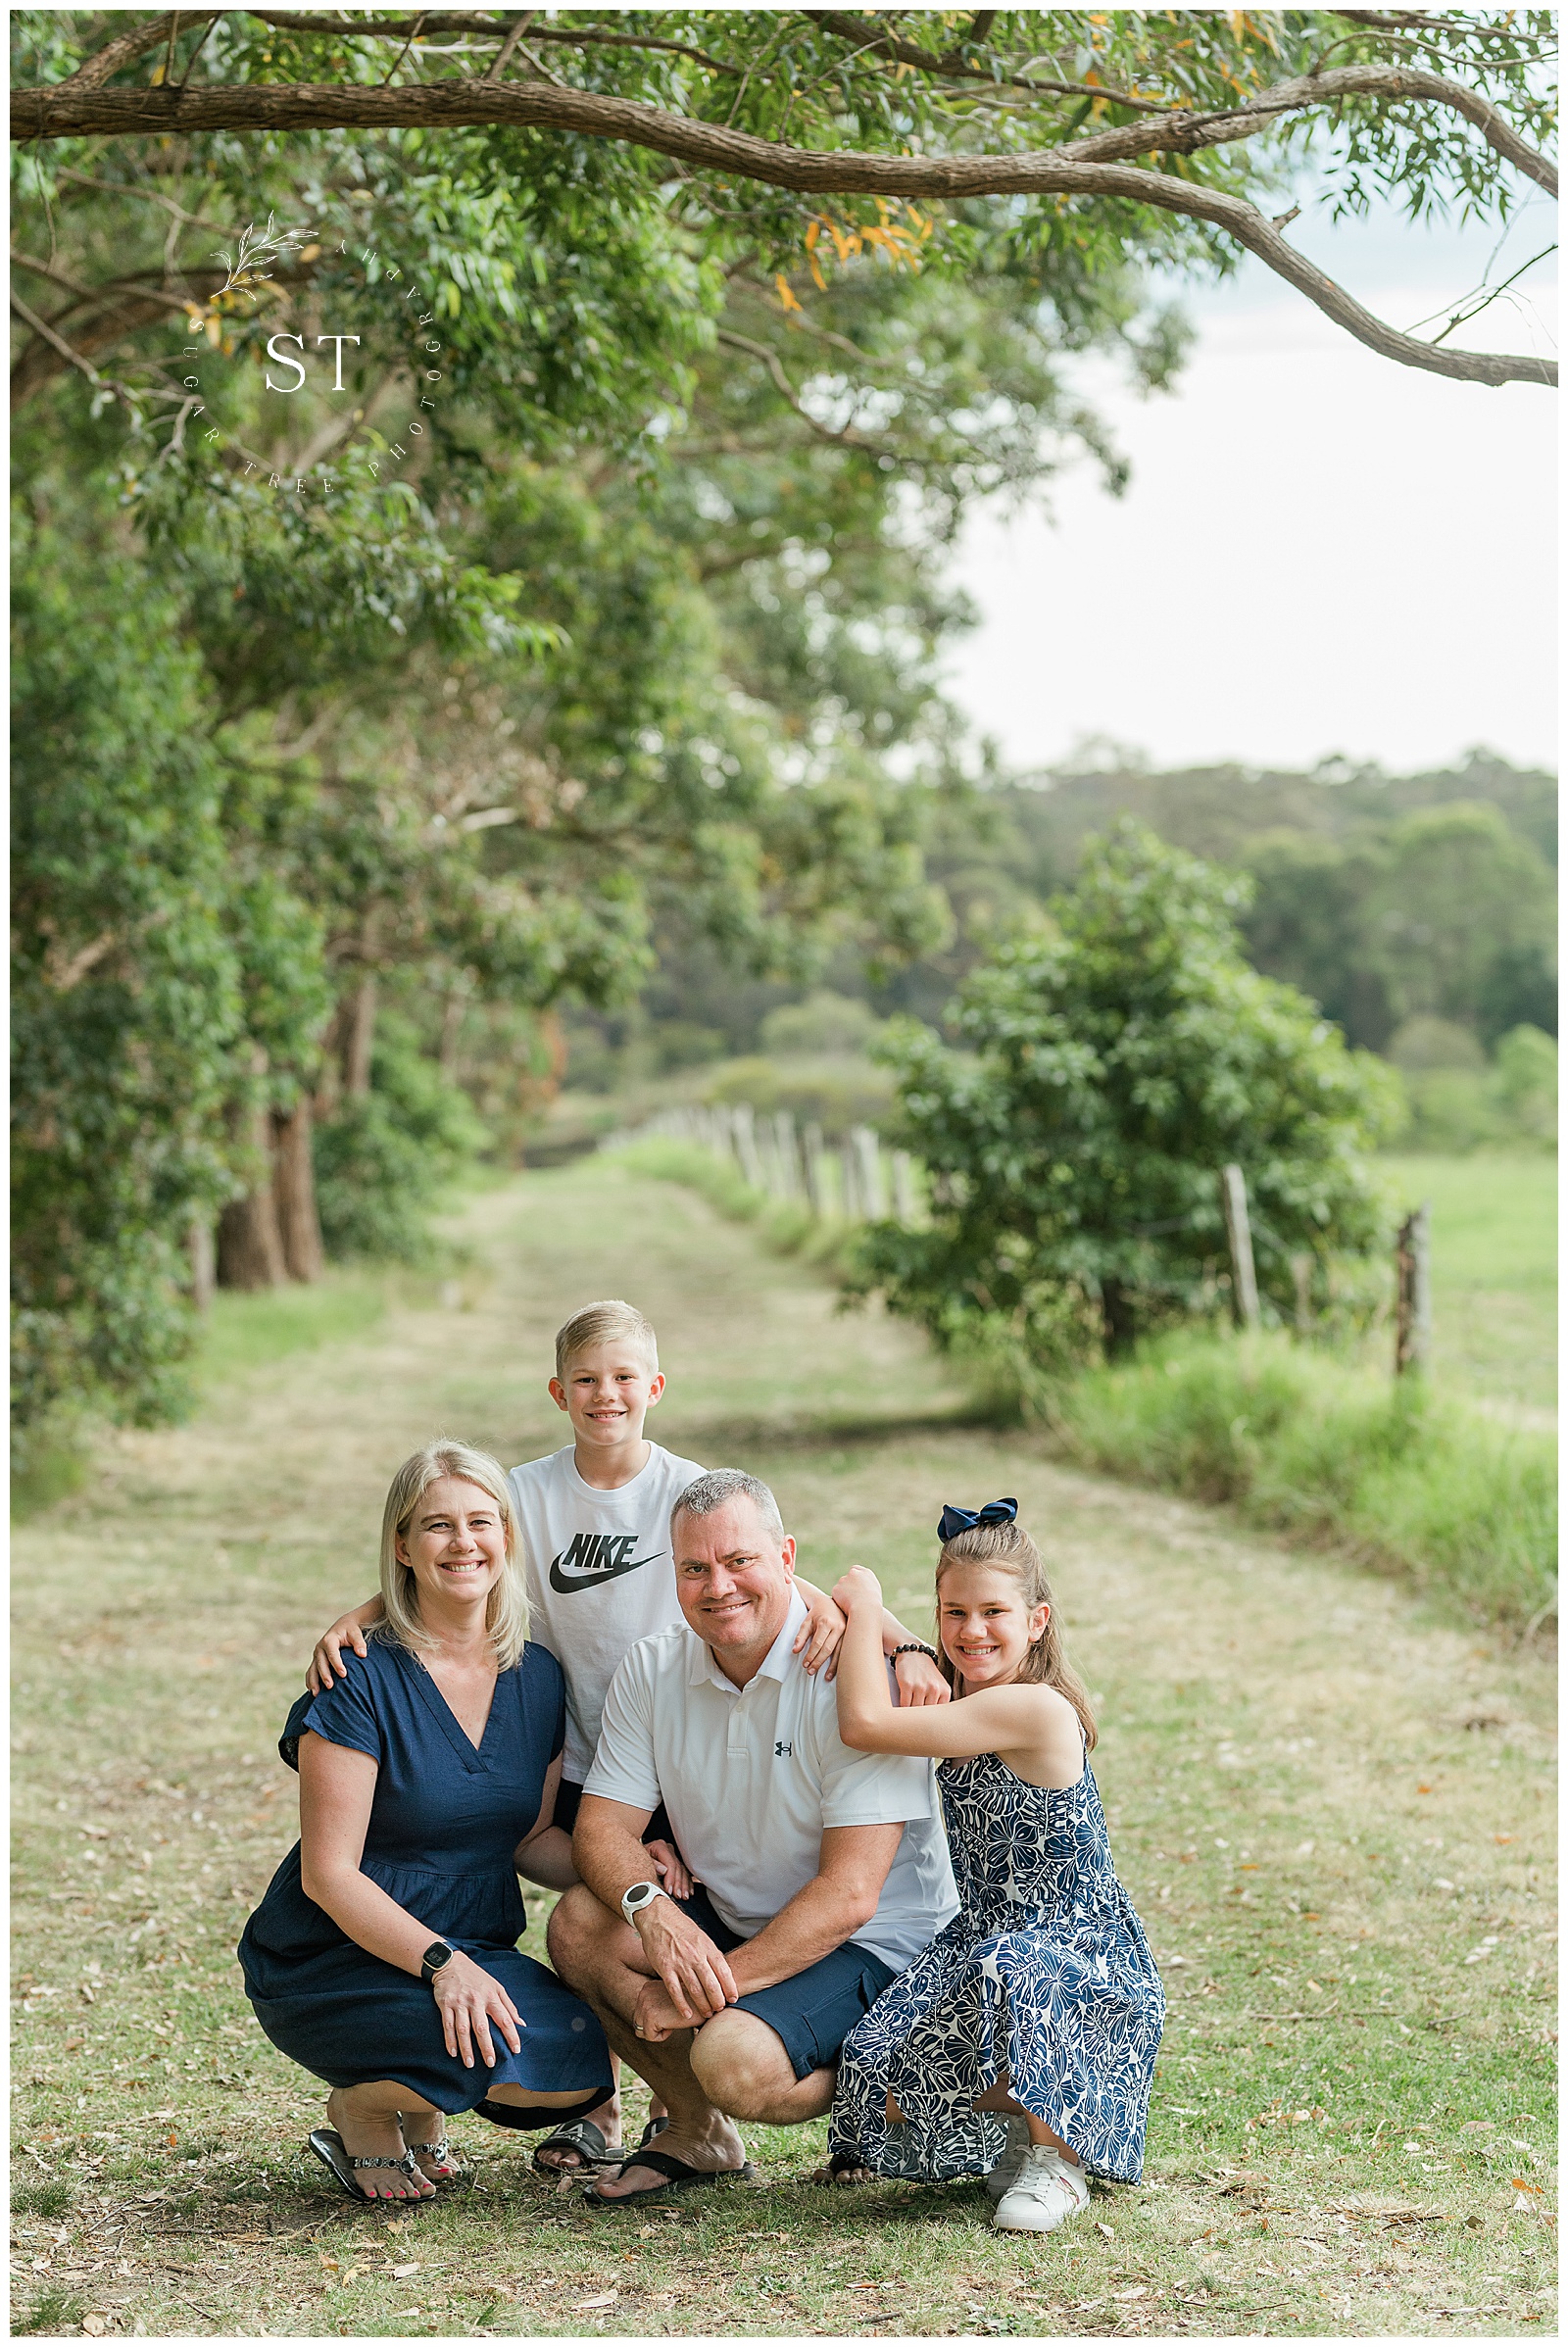 Family Photo session at Fagan Park. Tree lined alleyway